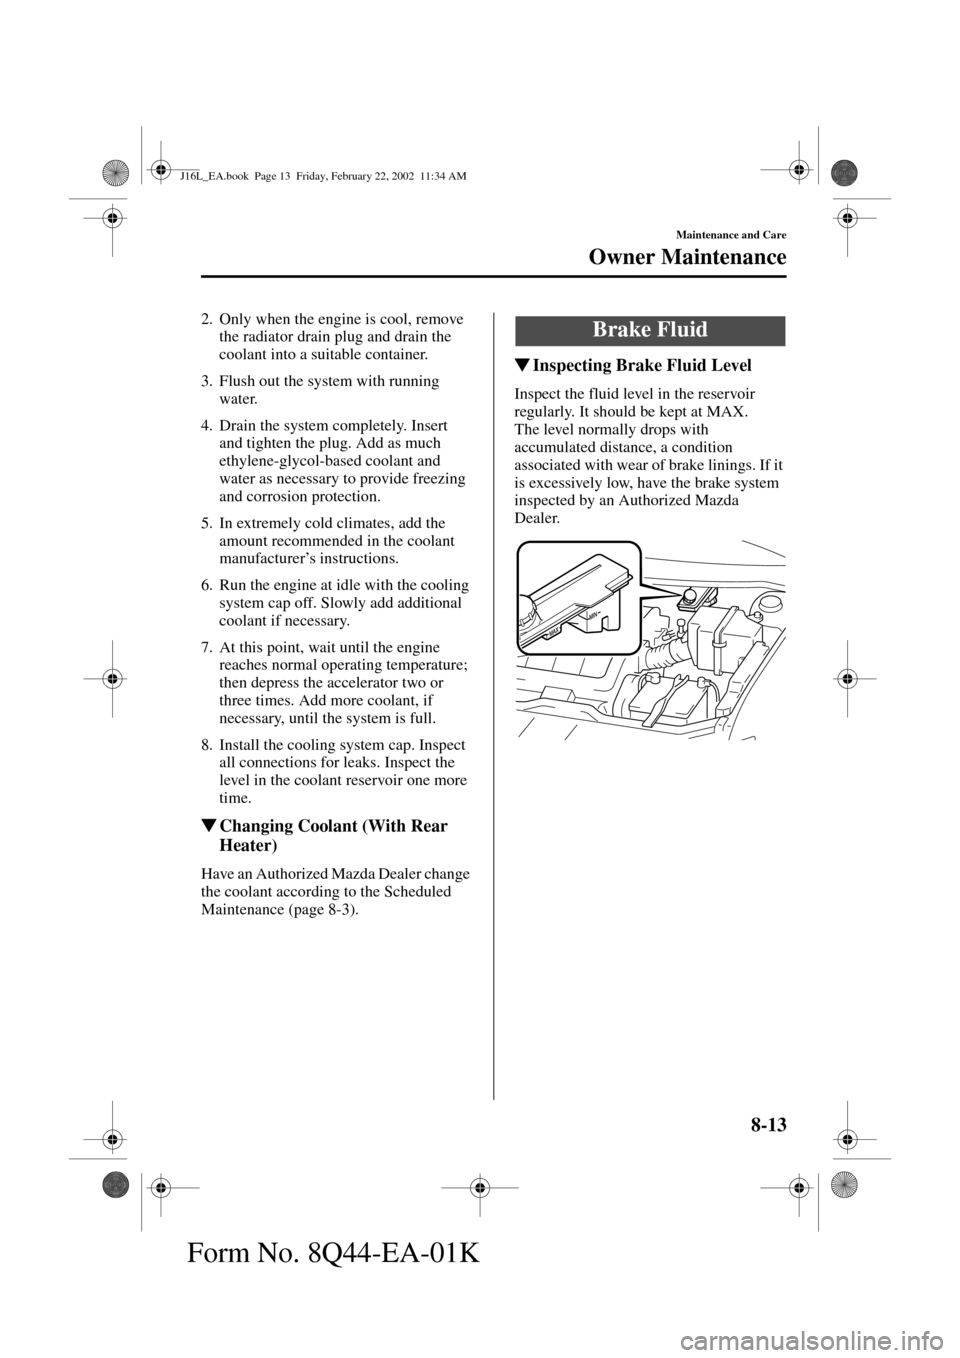 MAZDA MODEL MPV 2002  Owners Manual (in English) 8-13
Maintenance and Care
Owner Maintenance
Form No. 8Q44-EA-01K
2. Only when the engine is cool, remove 
the radiator drain plug and drain the 
coolant into a suitable container.
3. Flush out the sys